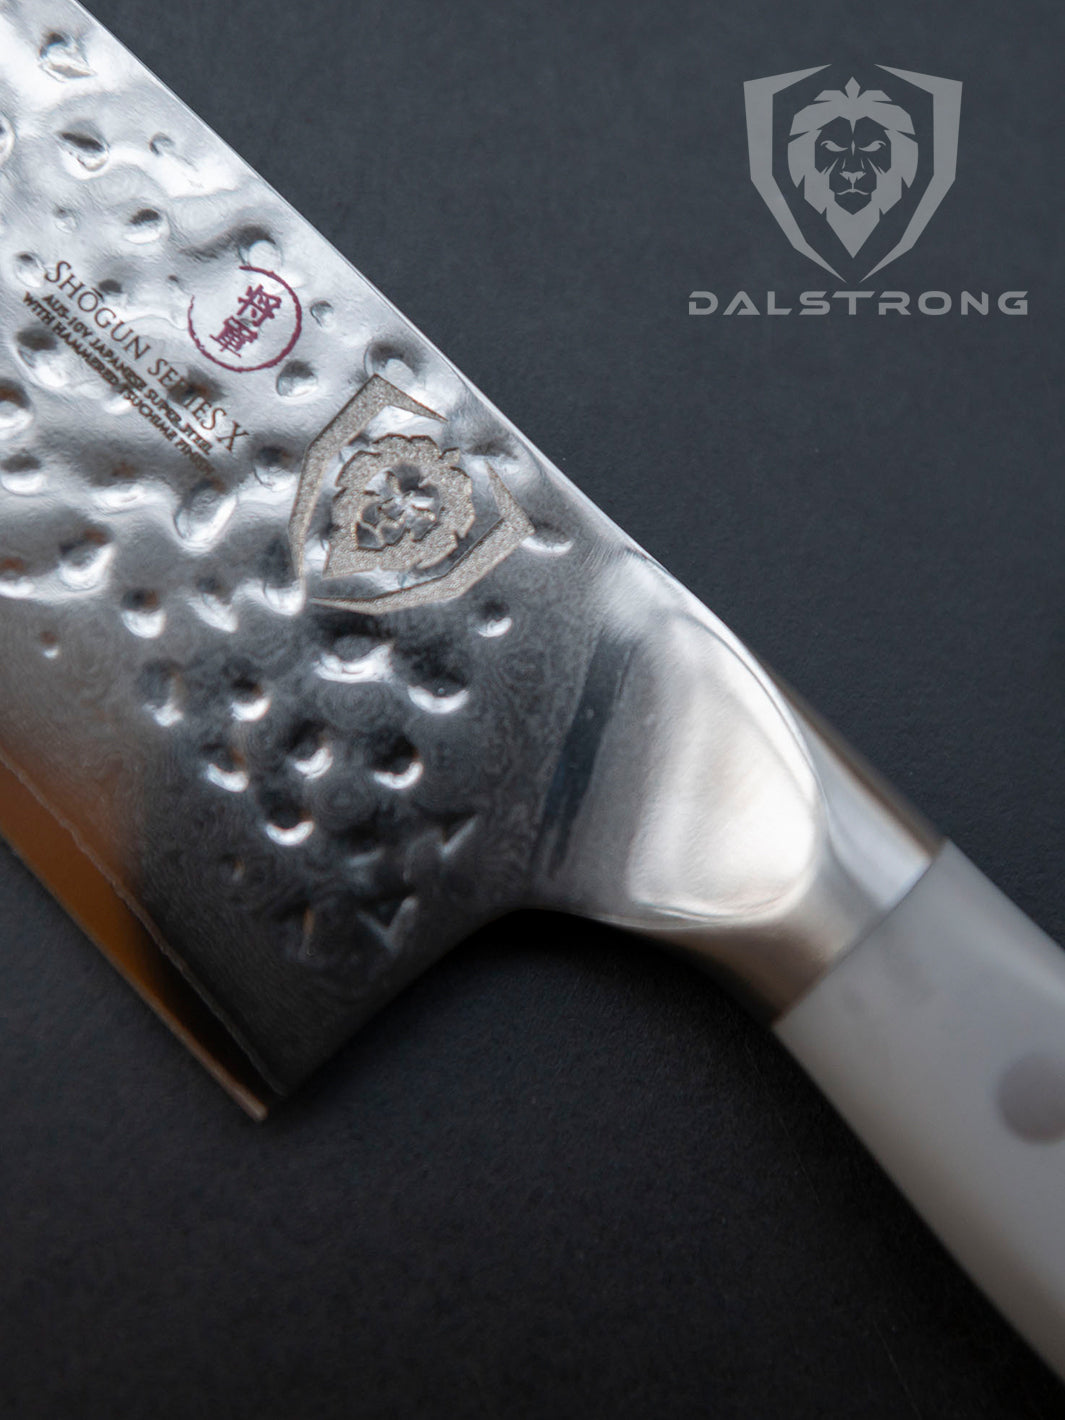 Dalstrong shogun series 8 inch chef knife with smokey gray handle showcasing it's series and dalstrong logo.